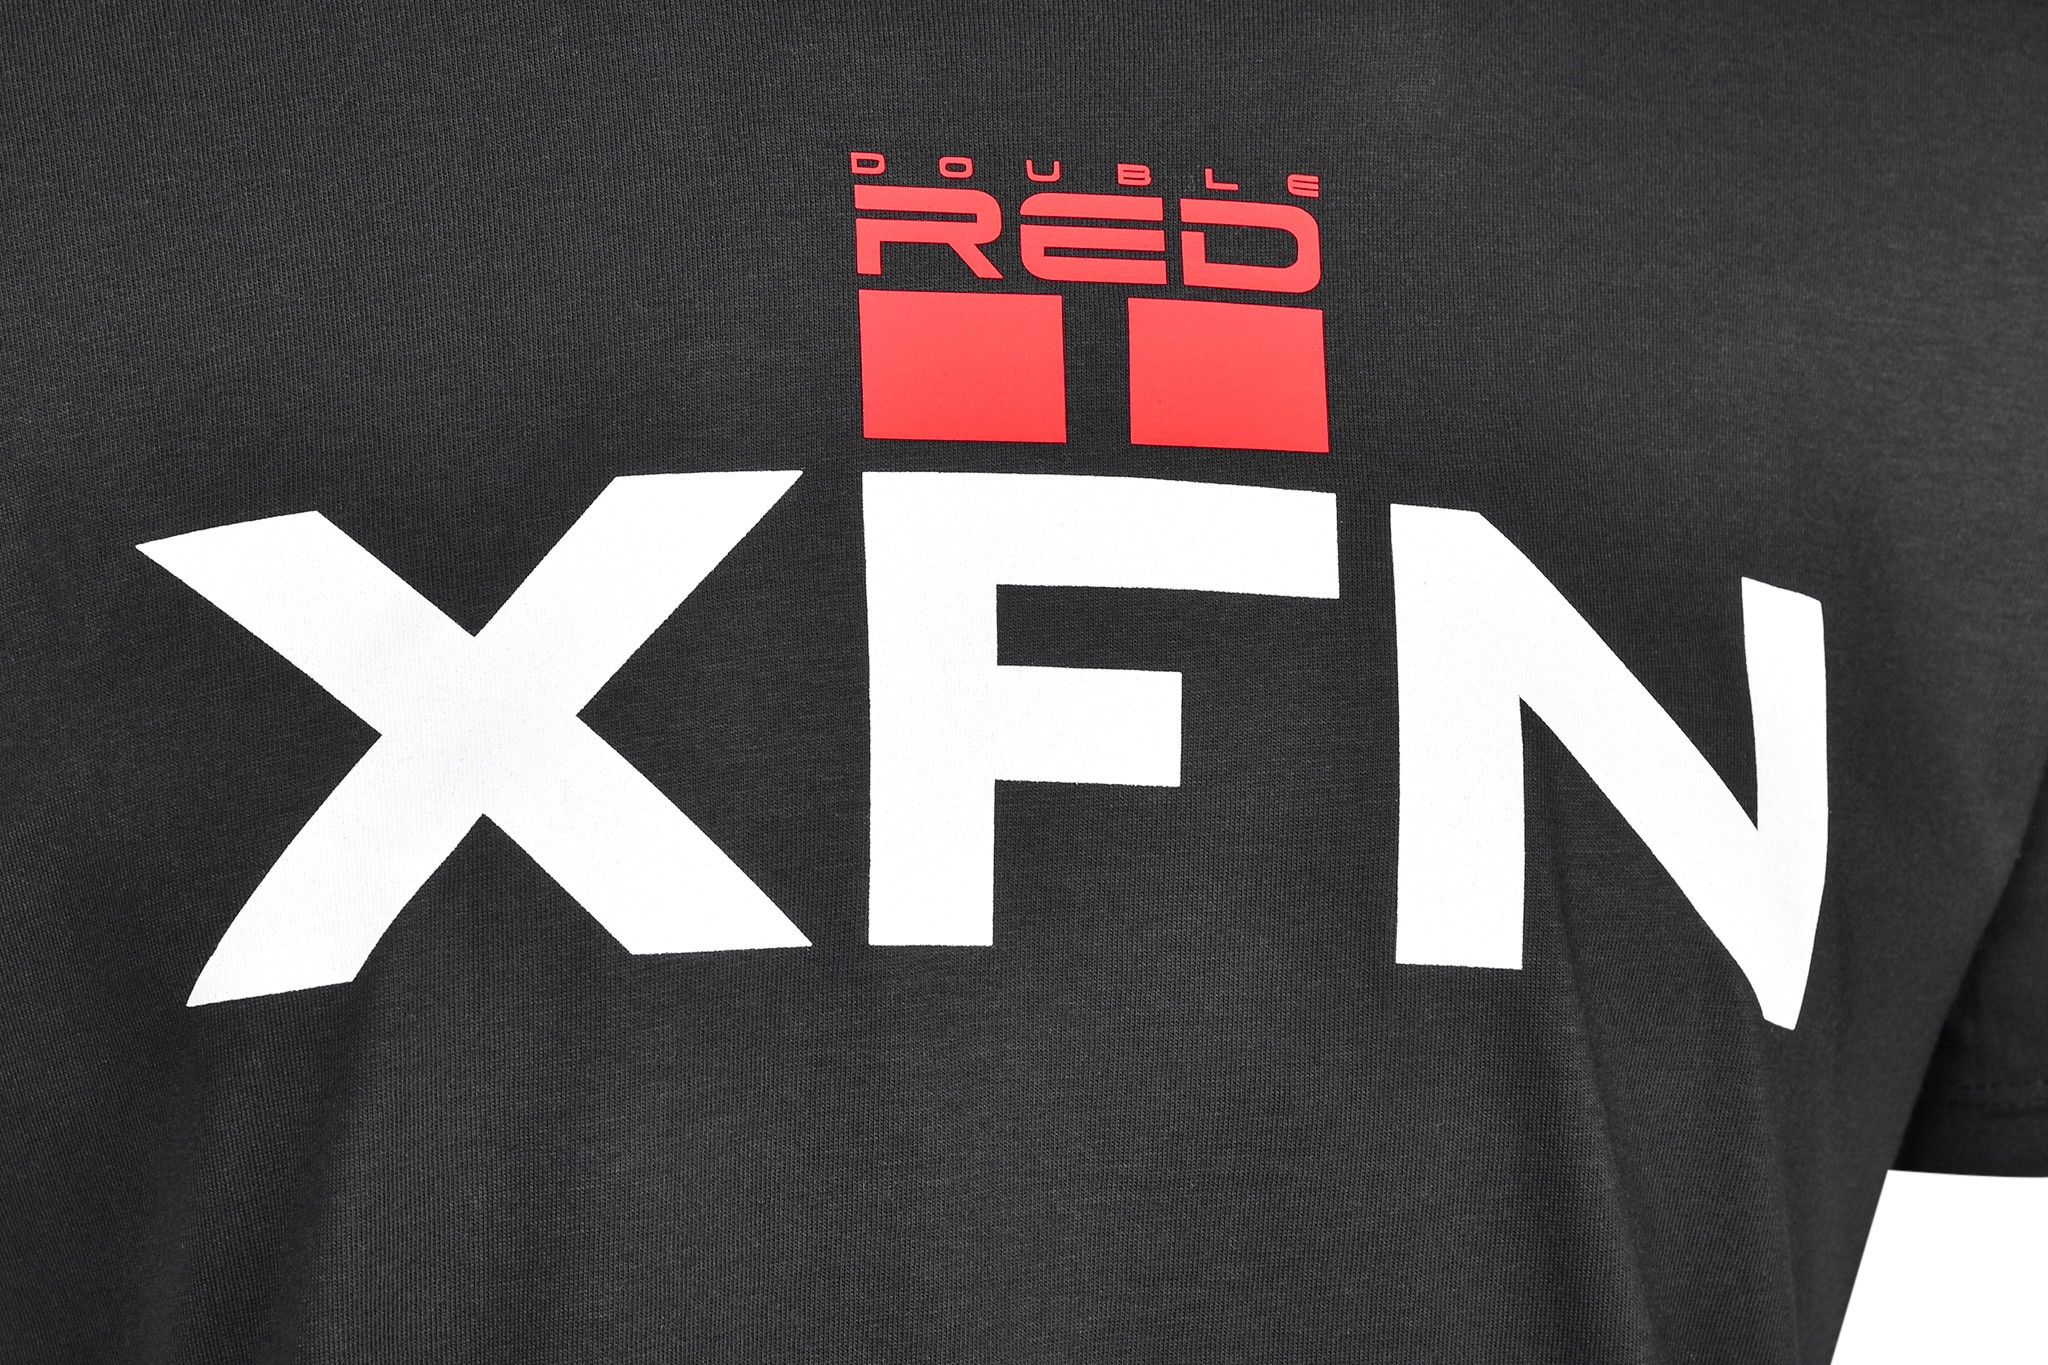 T-Shirt XFN & DOUBLE RED Cooperation Black